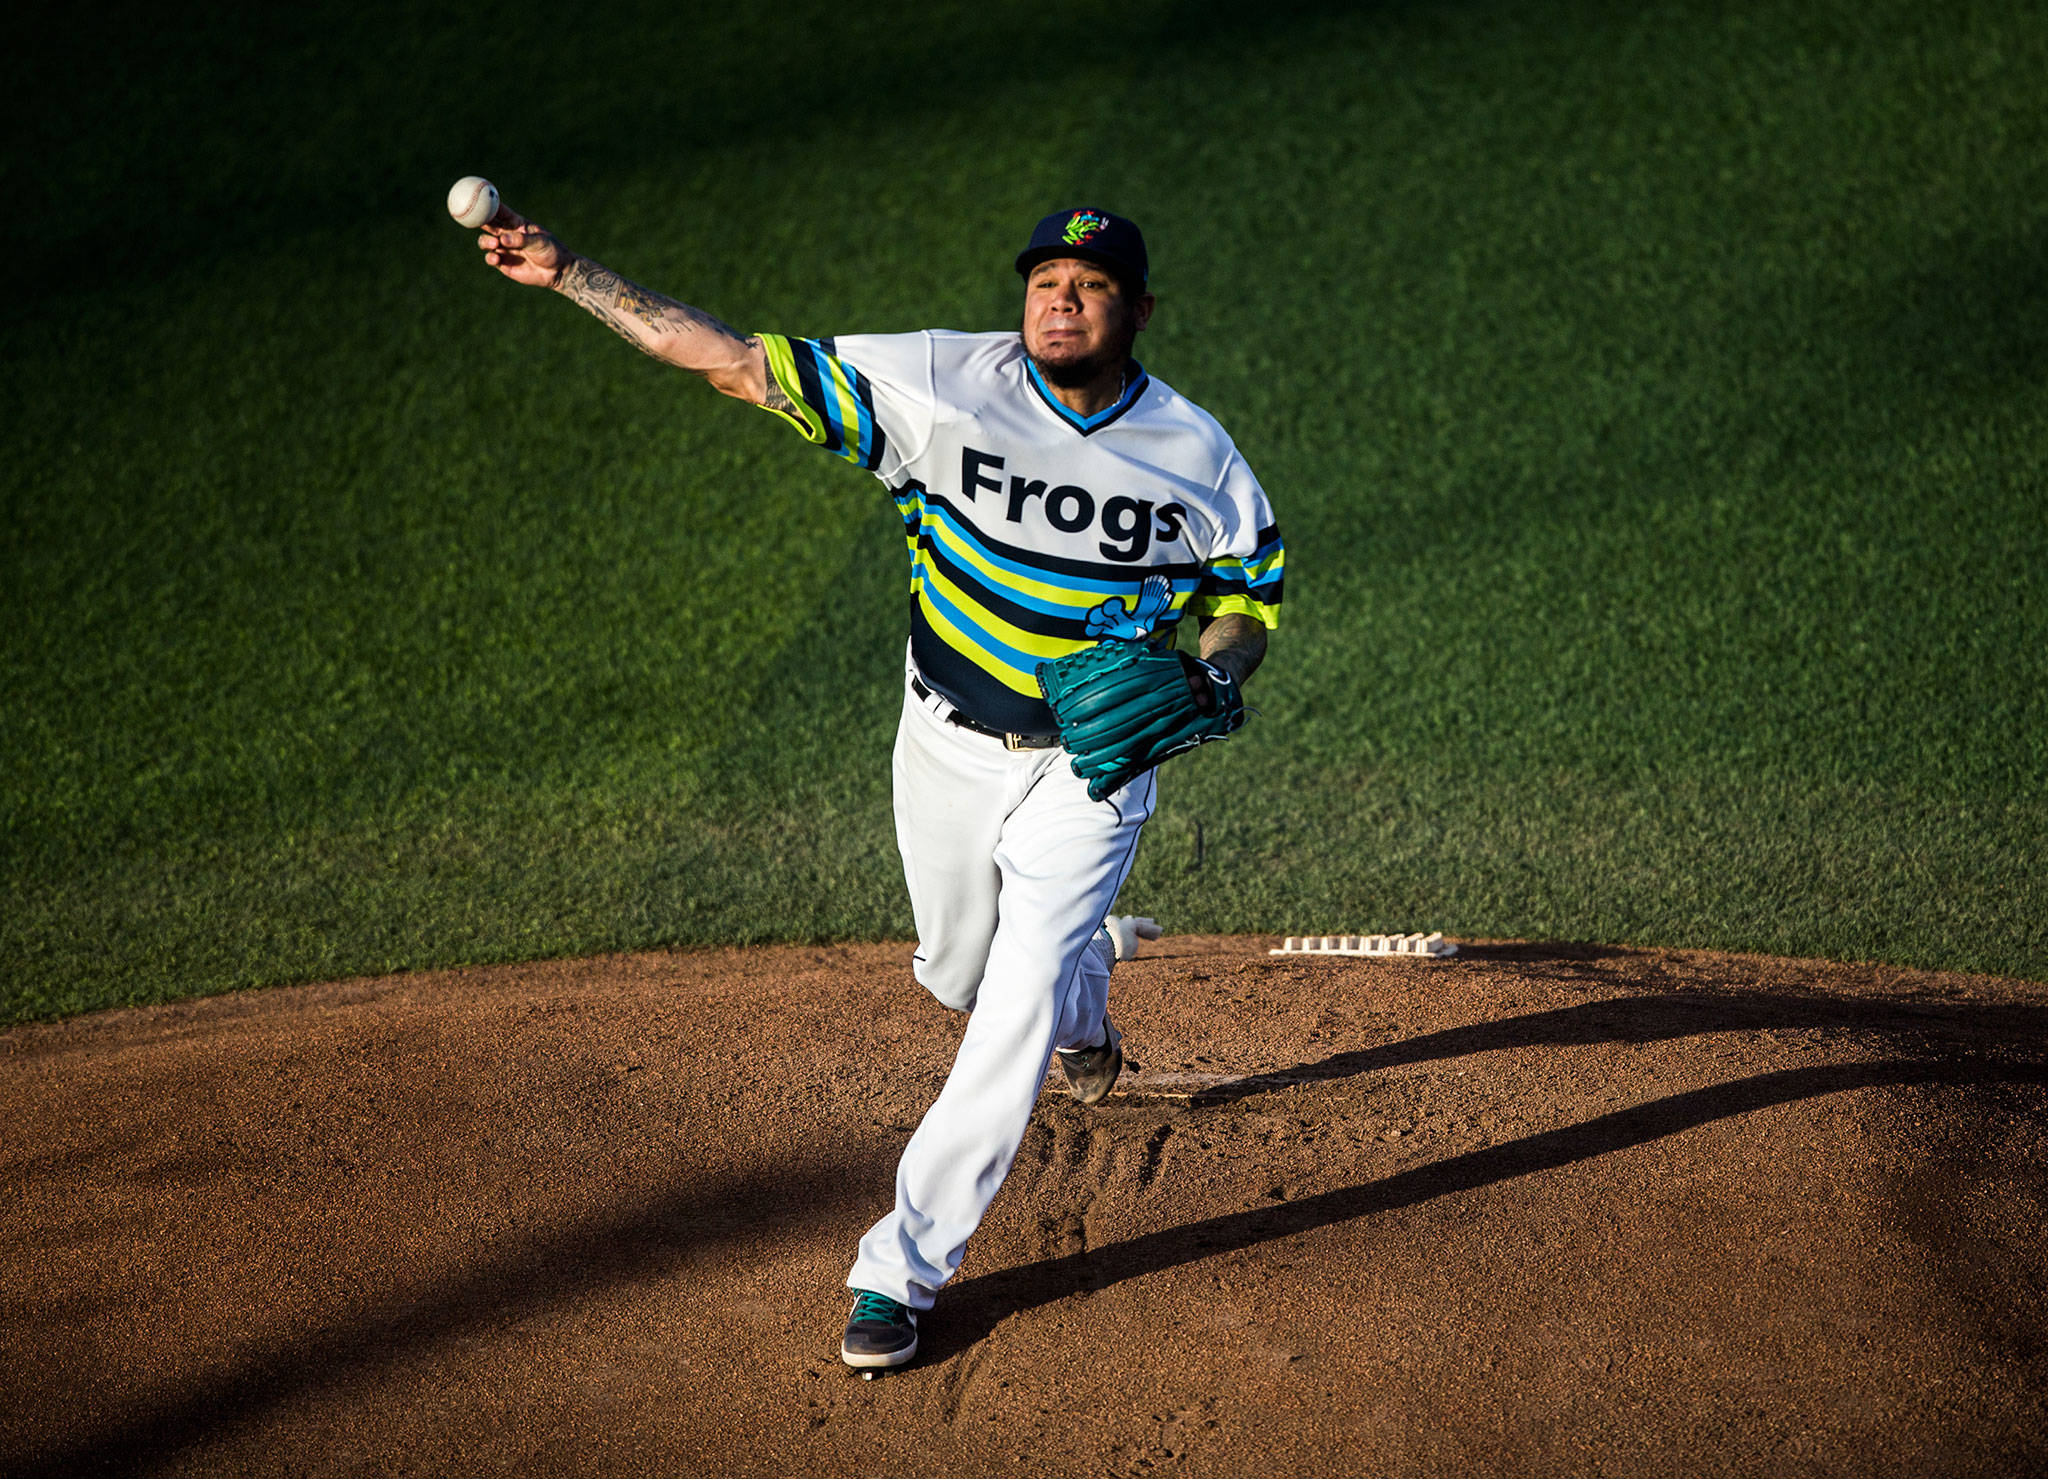 Mariners’ pitcher Felix Hernandez pitches for the AquaSox during a rehab appearance Wednesday against the Tri-City Dust Devils at Funko Field at Everett Memorial Stadium in Everett. (Olivia Vanni / The Herald)